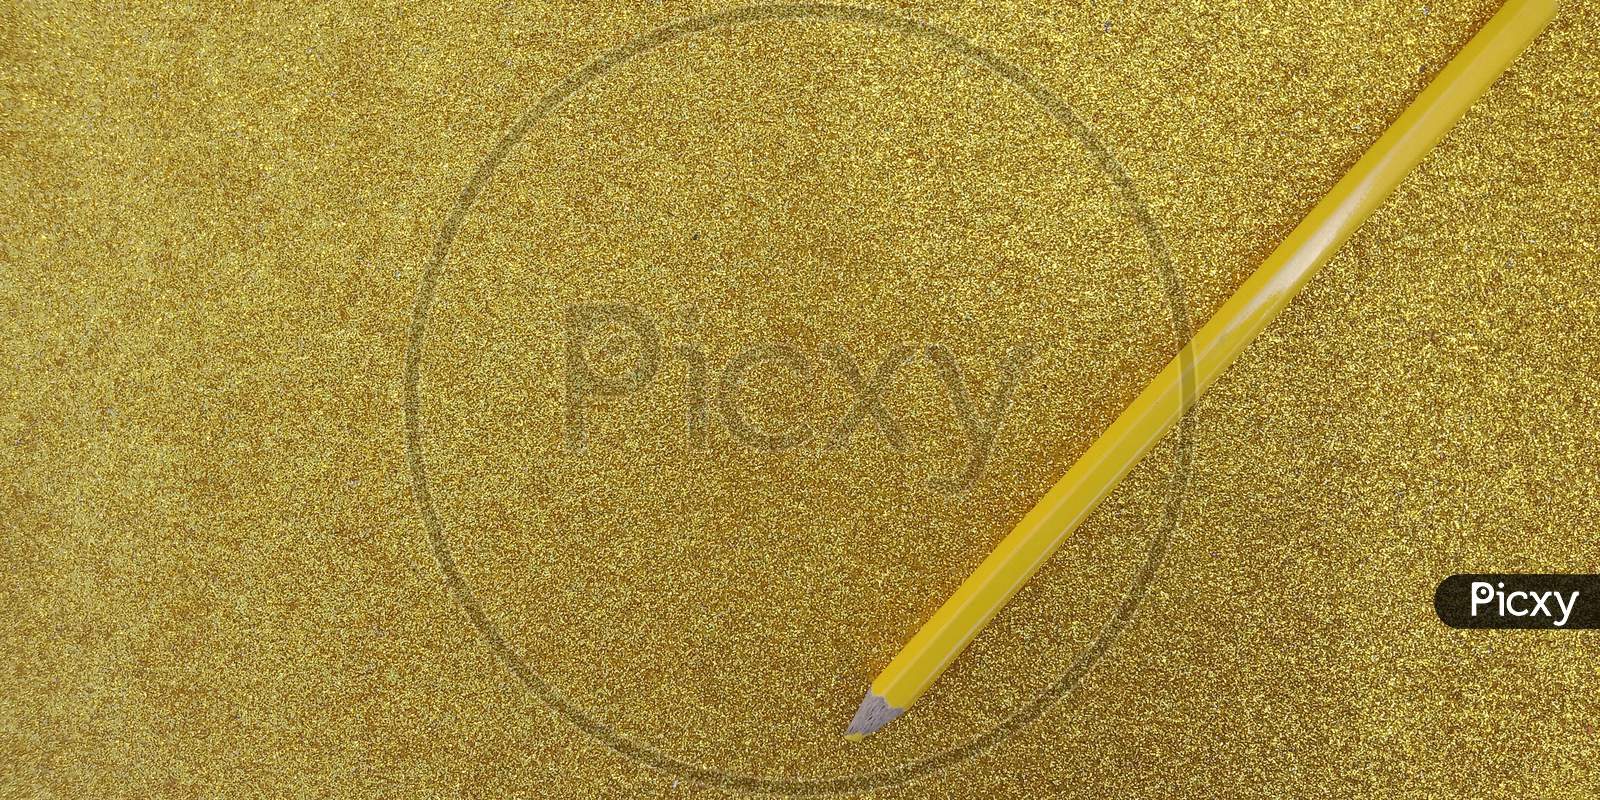 Gold glitter background texture glittery Vector Image